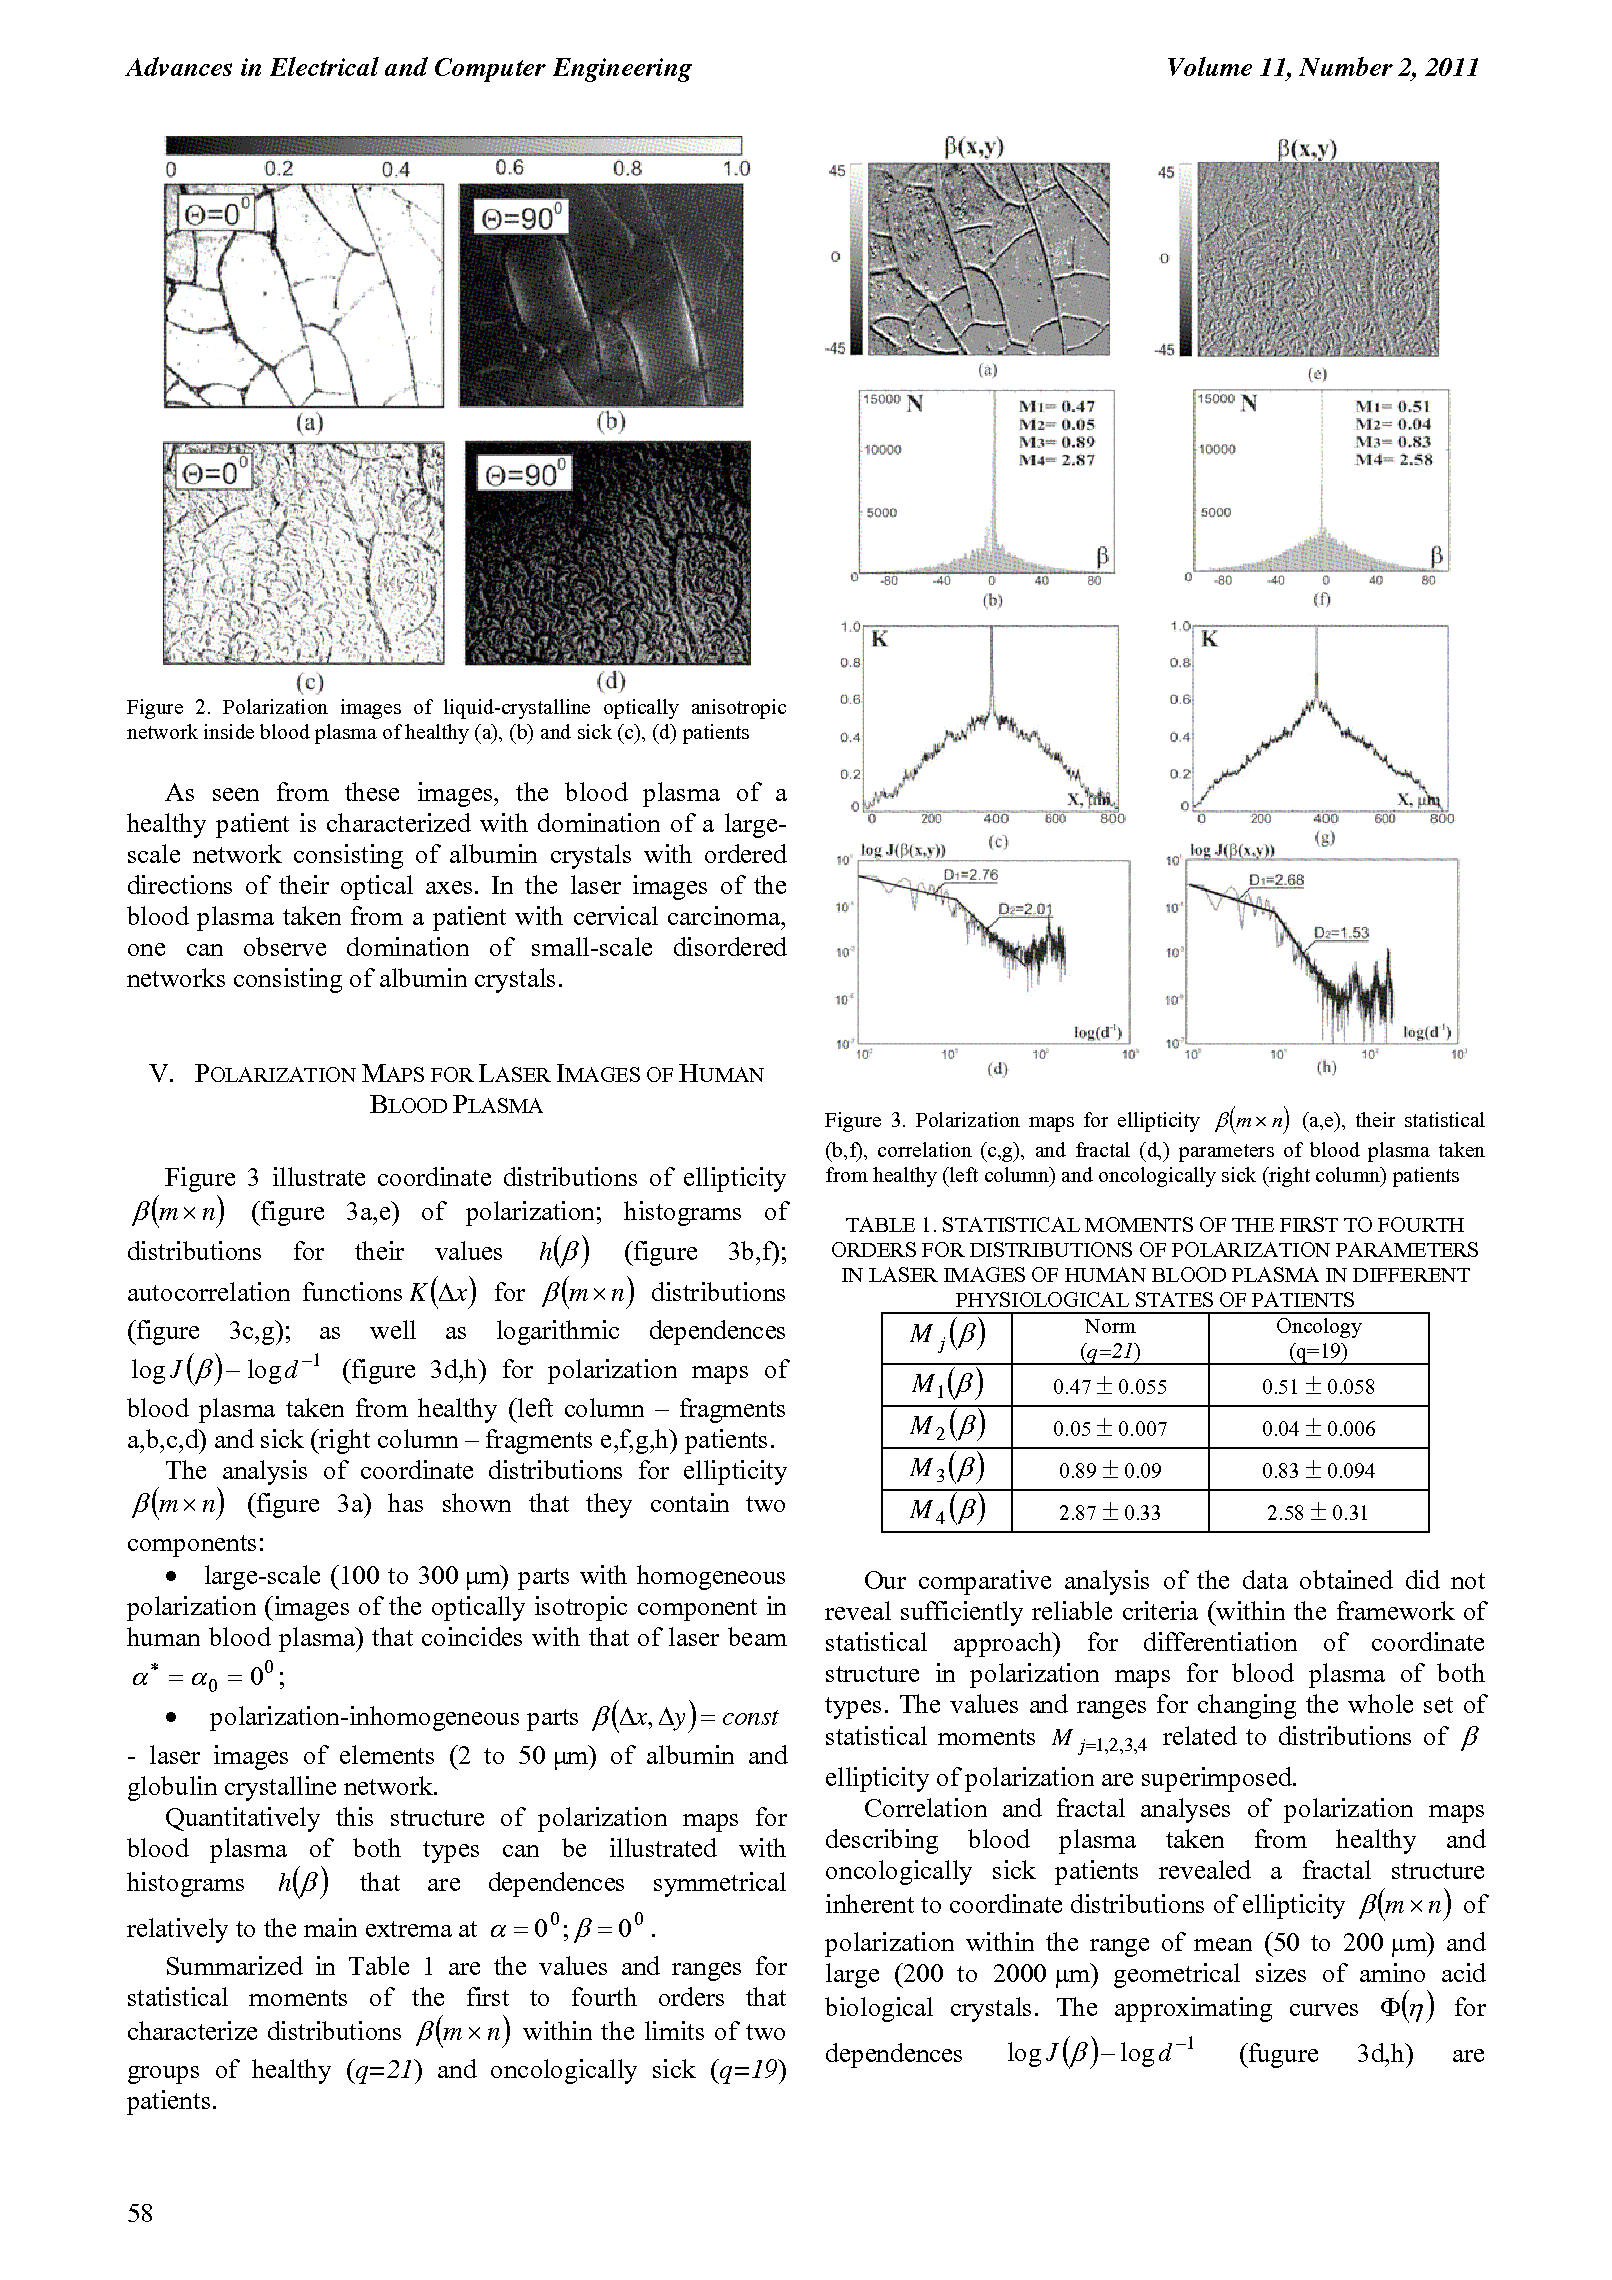 PDF Quickview for paper with DOI:10.4316/AECE.2011.02009